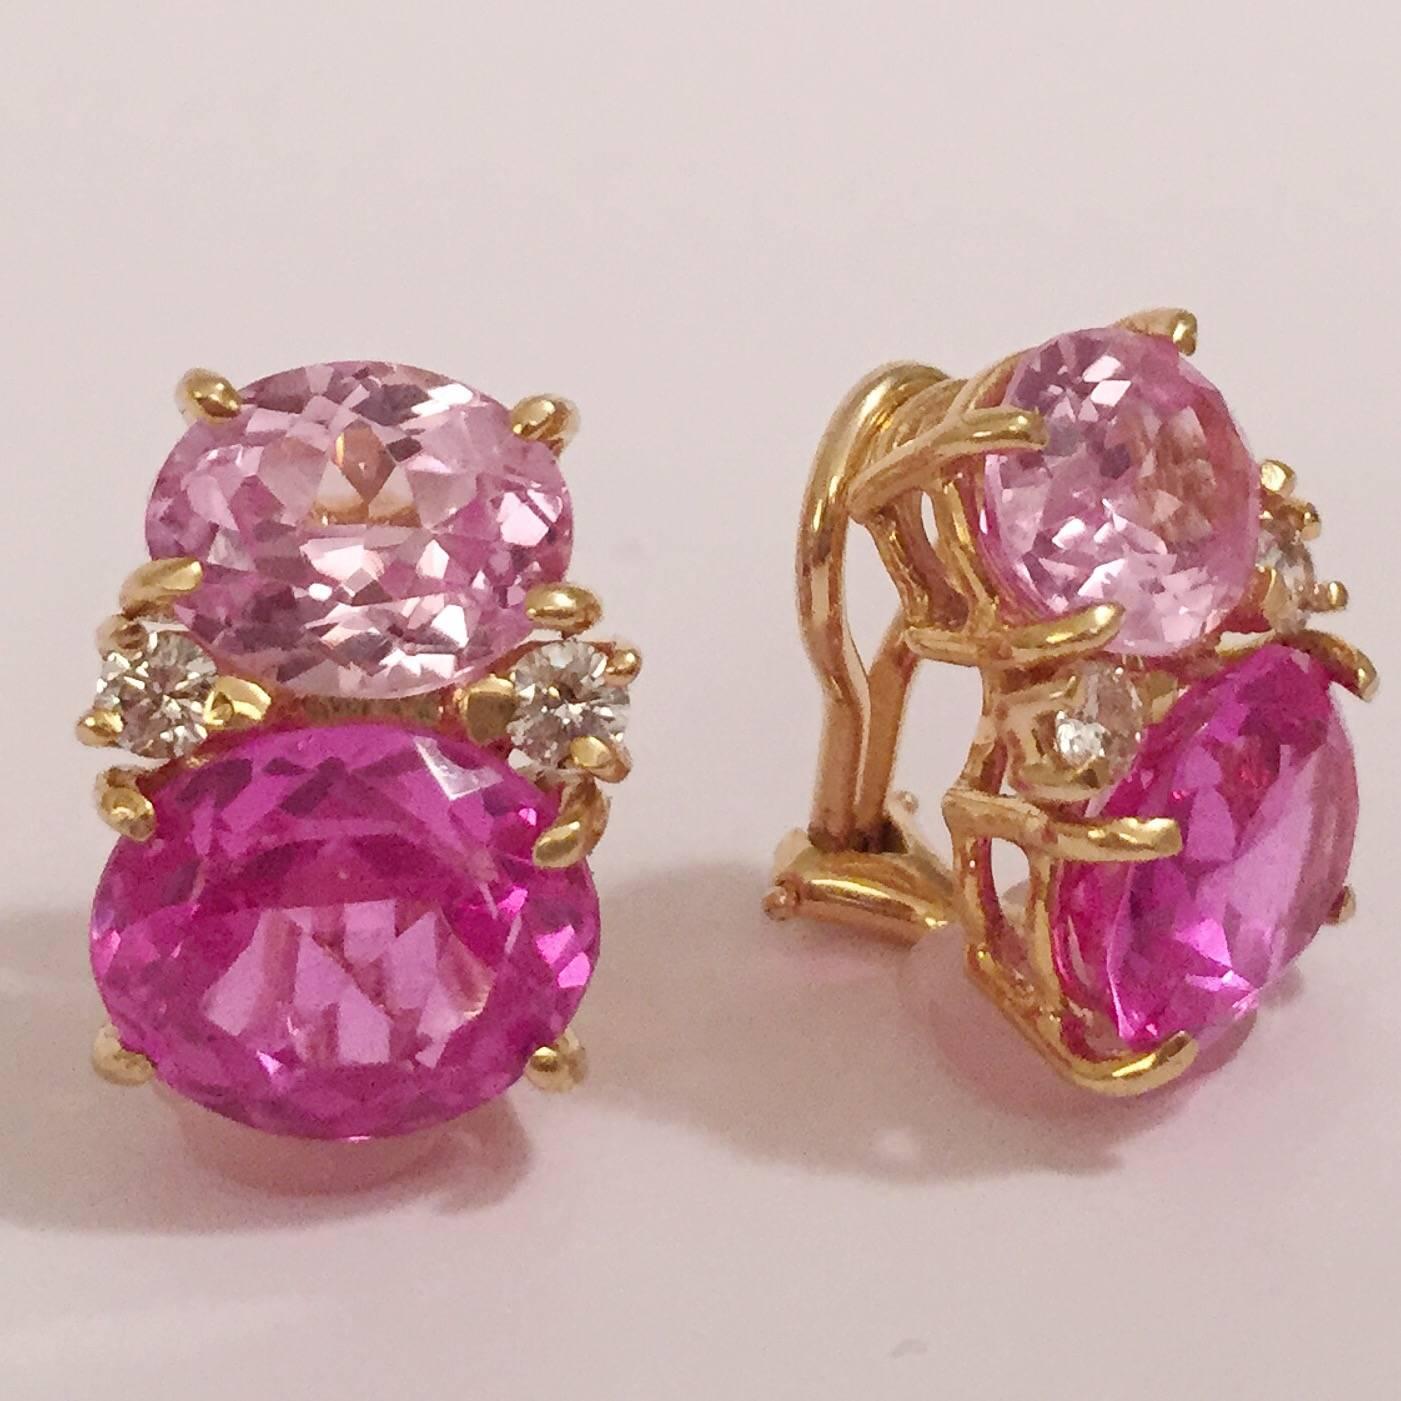 Medium 18kt yellow gold GUM DROP™ earrings with faceted Pale Pink Topaz (approximately 2.5 cts each), faceted Dark Pink Topaz (approximately 5 cts each), and 4 diamonds weighing ~0.40 cts.   

Specifications: Height: 3/4